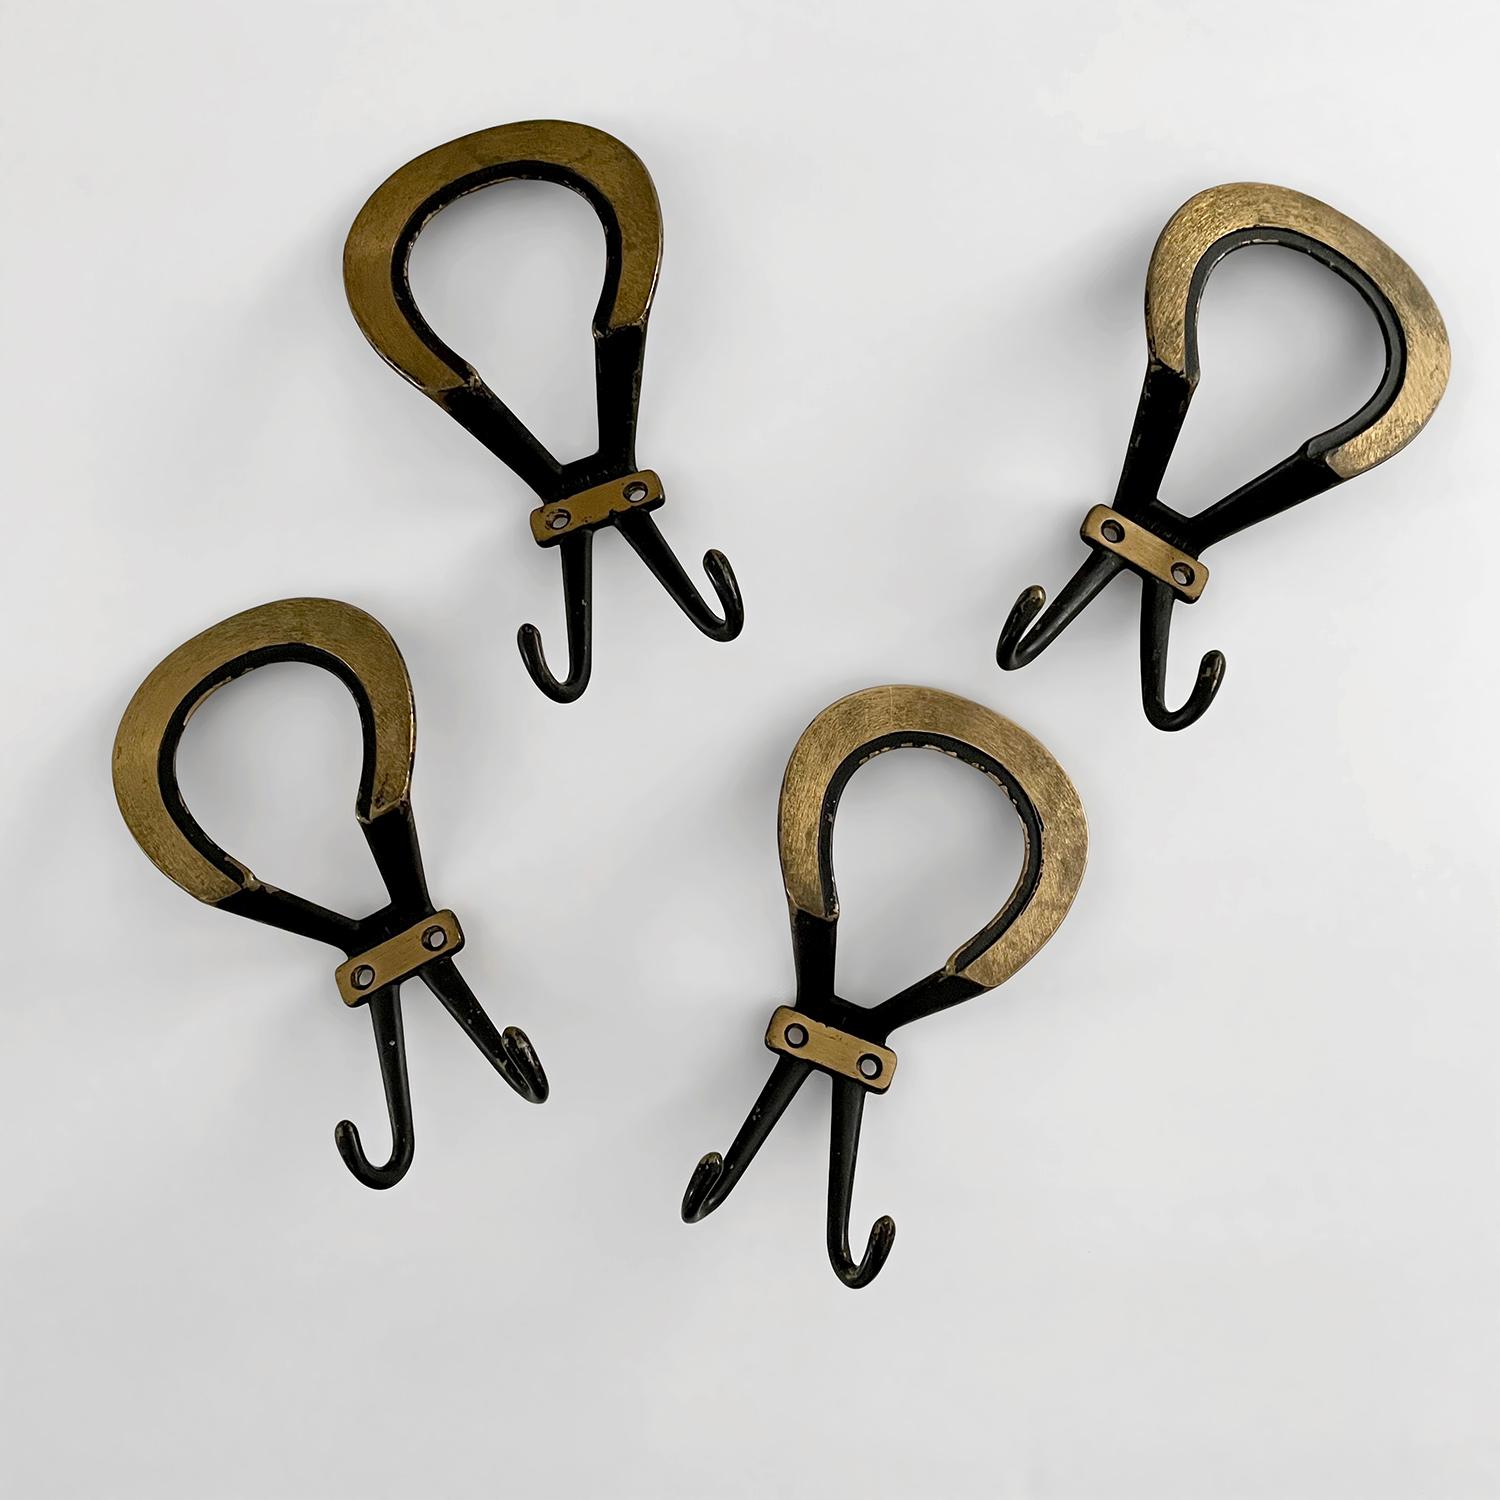 French gold leaf & iron loop hook
France, mid century
Beautifully contrasted iron with gold leaf accents creates a palette to please    
Each wall mounted hook is supported by a bracket which requires two screws
Upper portion is beautifully sculpted